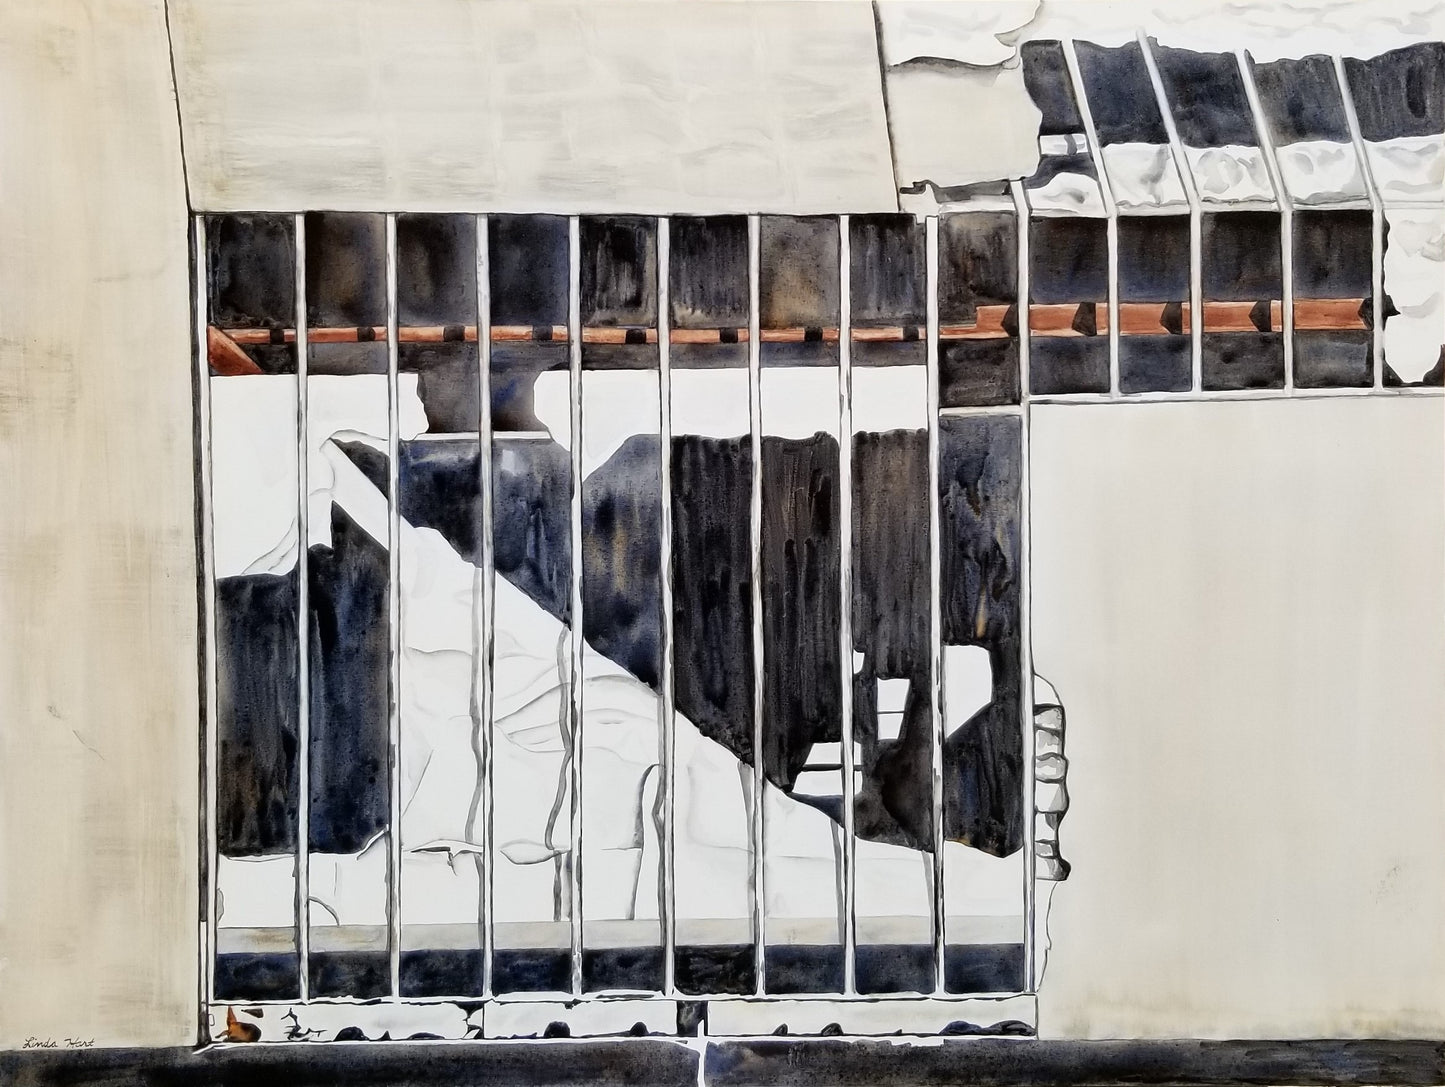 Skeletal Warehouse - 4' x 3' x 1.5" - Original Watercolor Painting on Gallery Wrapped Watercolor Canvas